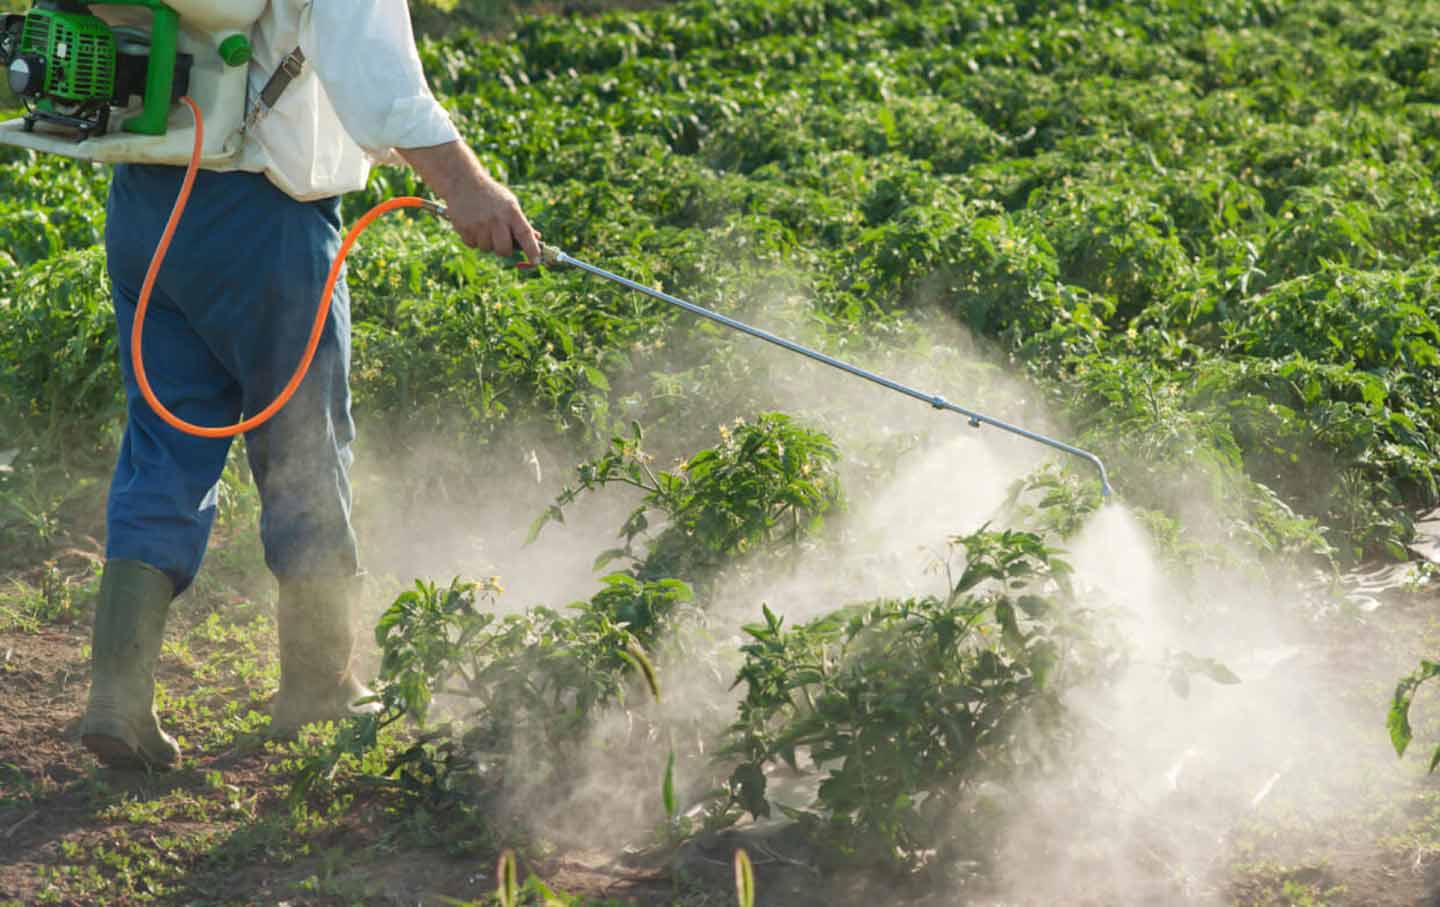 harmful effects of pesticides on environment